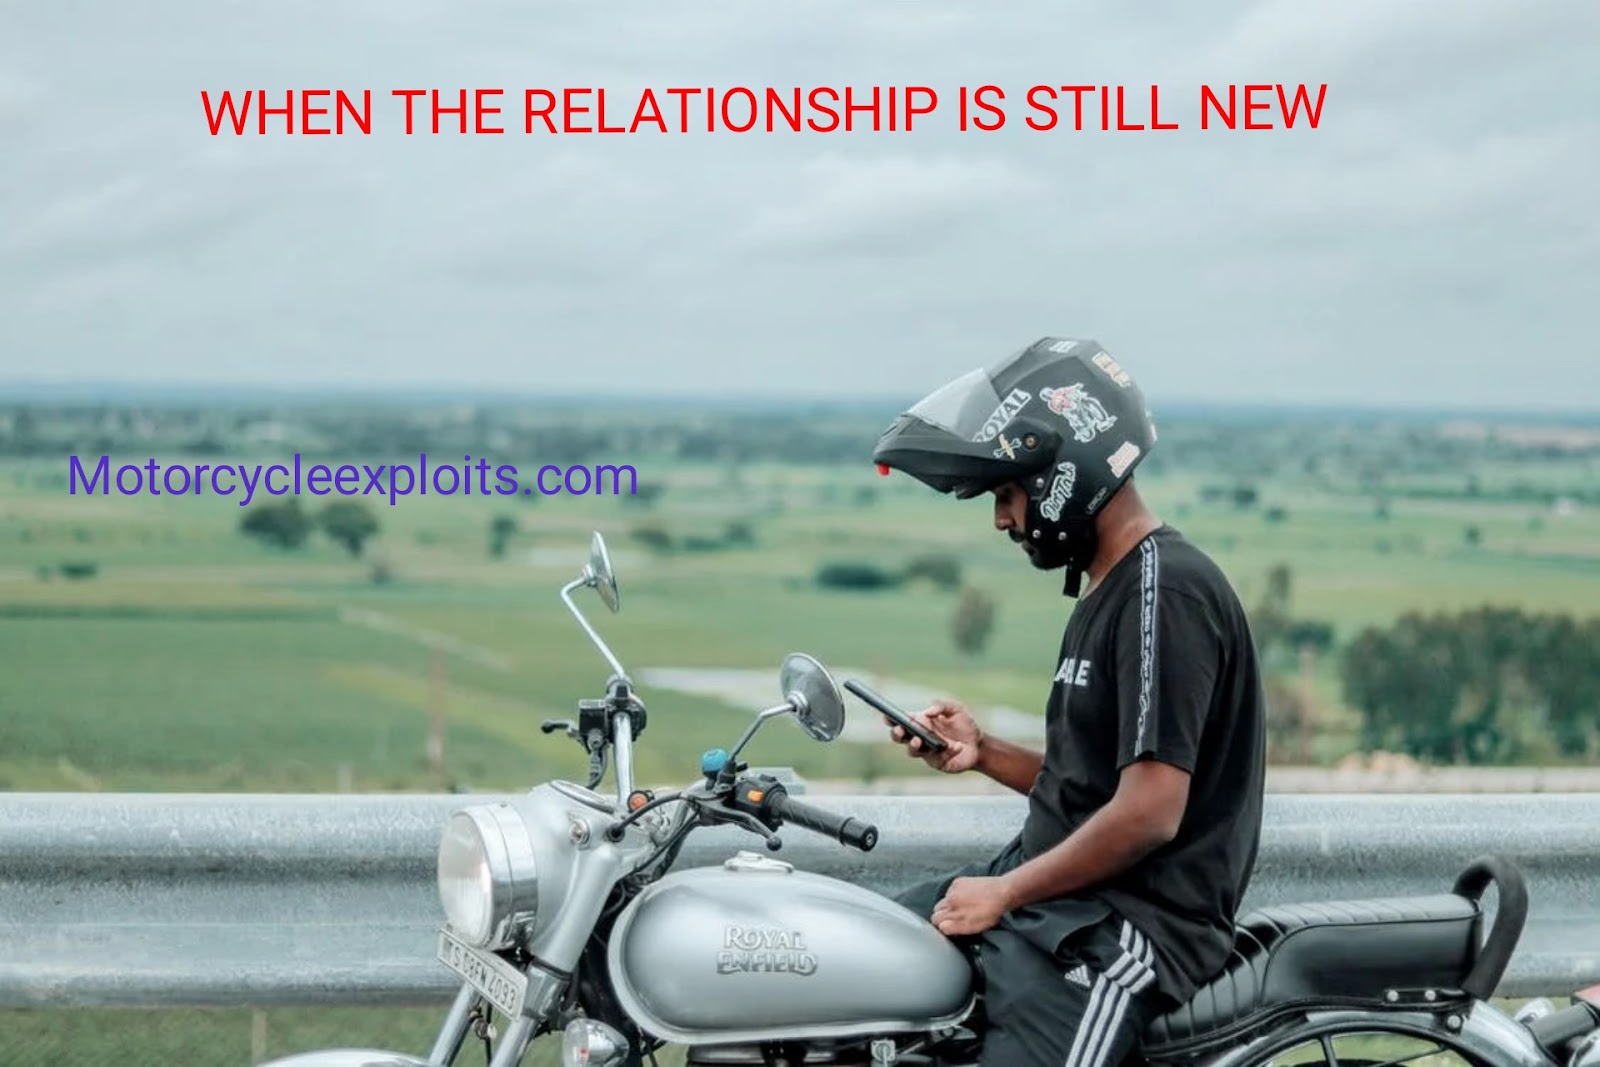 Funny Motorcycle Memes for Happy Motorcycle Riders - Motorcycle Exploits